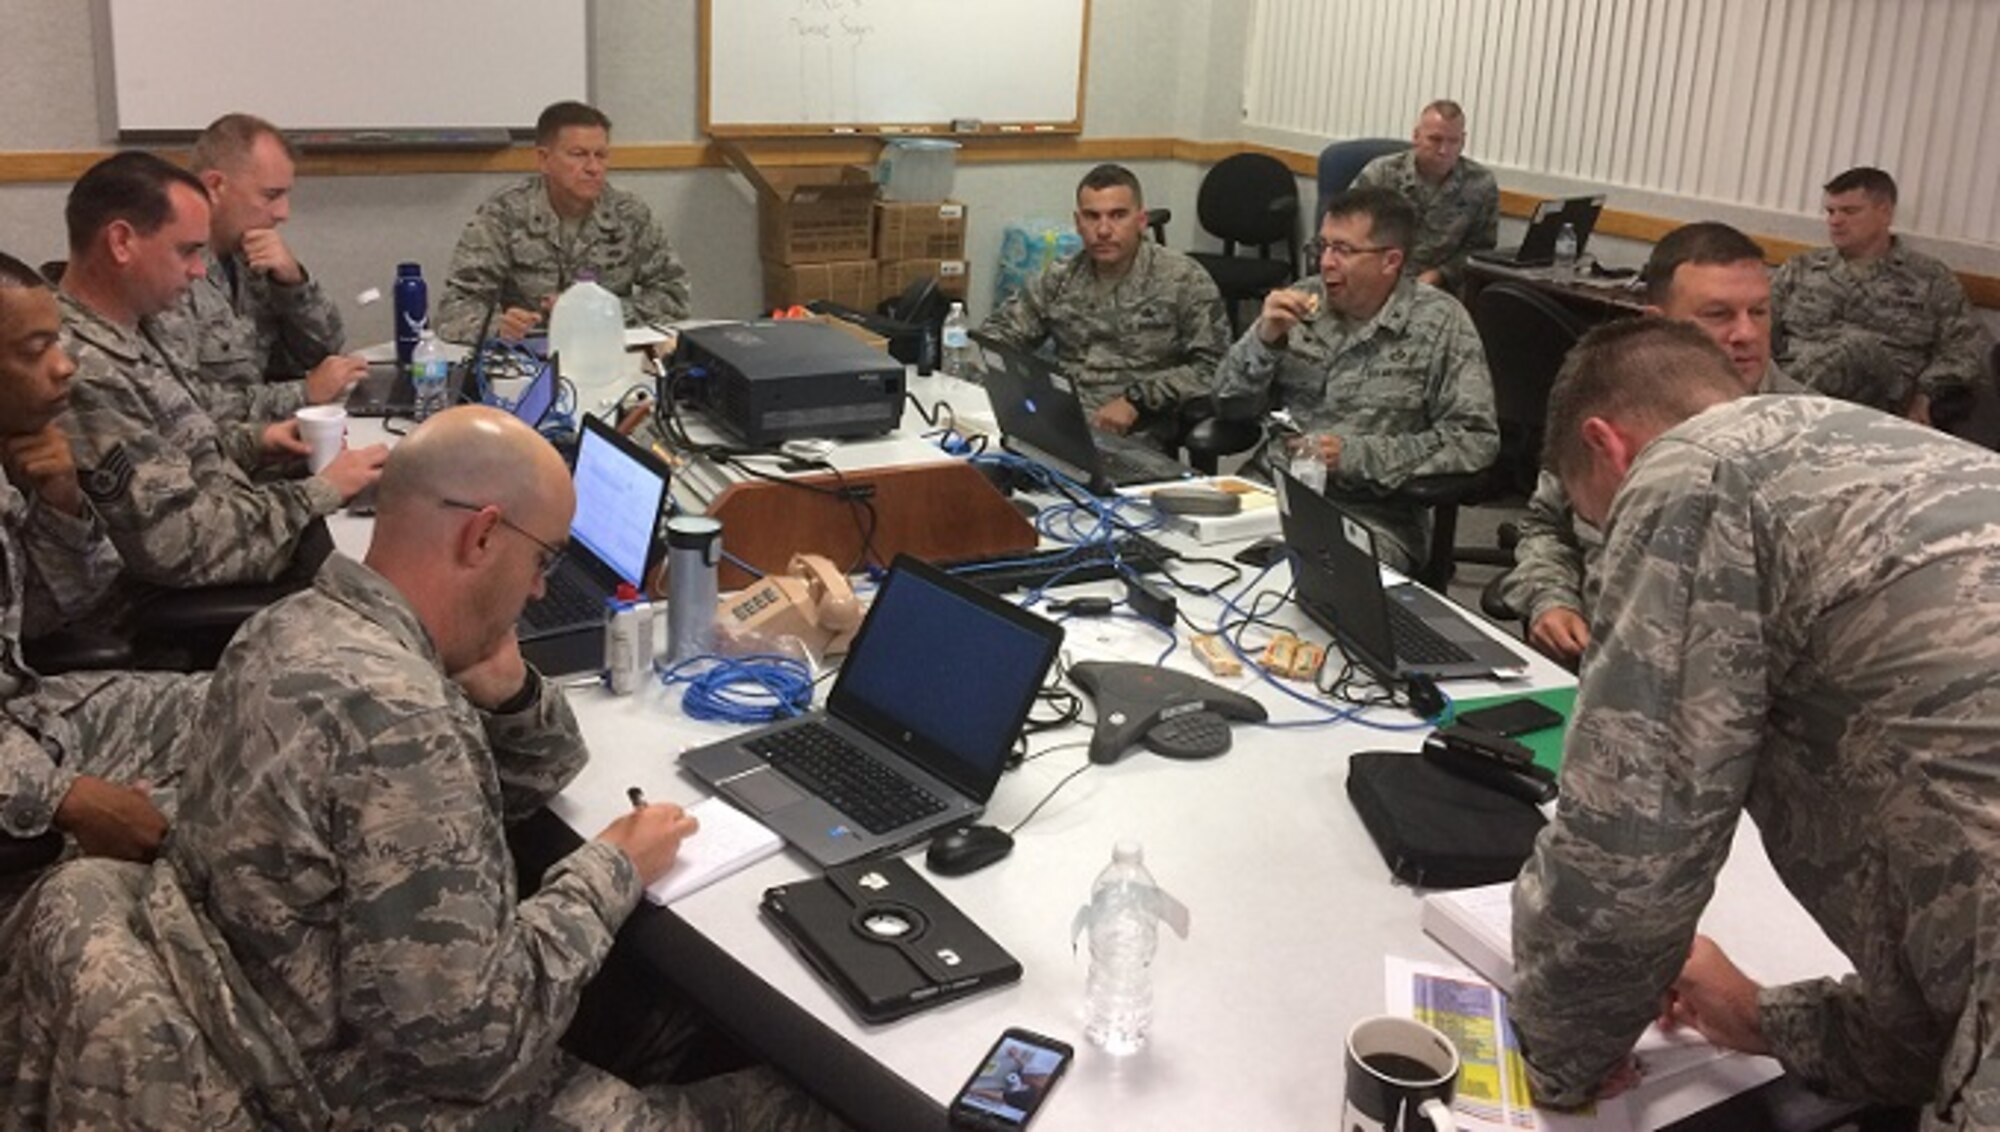 The "Silver Team" assumed command of the installation and released the "Blue Team" as mission control when they stood up at Kennedy Space Center Oct. 6, 2016. Two command and control teams and two hurricane recovery teams stood up during Hurricane Matthew to ride out the storm while Patrick Air Force Base and Cape Canaveral Air Force Station were closed. Together, the wing teams ran 24-hour operations and monitored the storm track from the day prior to the arrival of Hurricane Matthew through recovery operations. The 45th SW returned to normal operations within three days following the storm. (Courtesy photo)